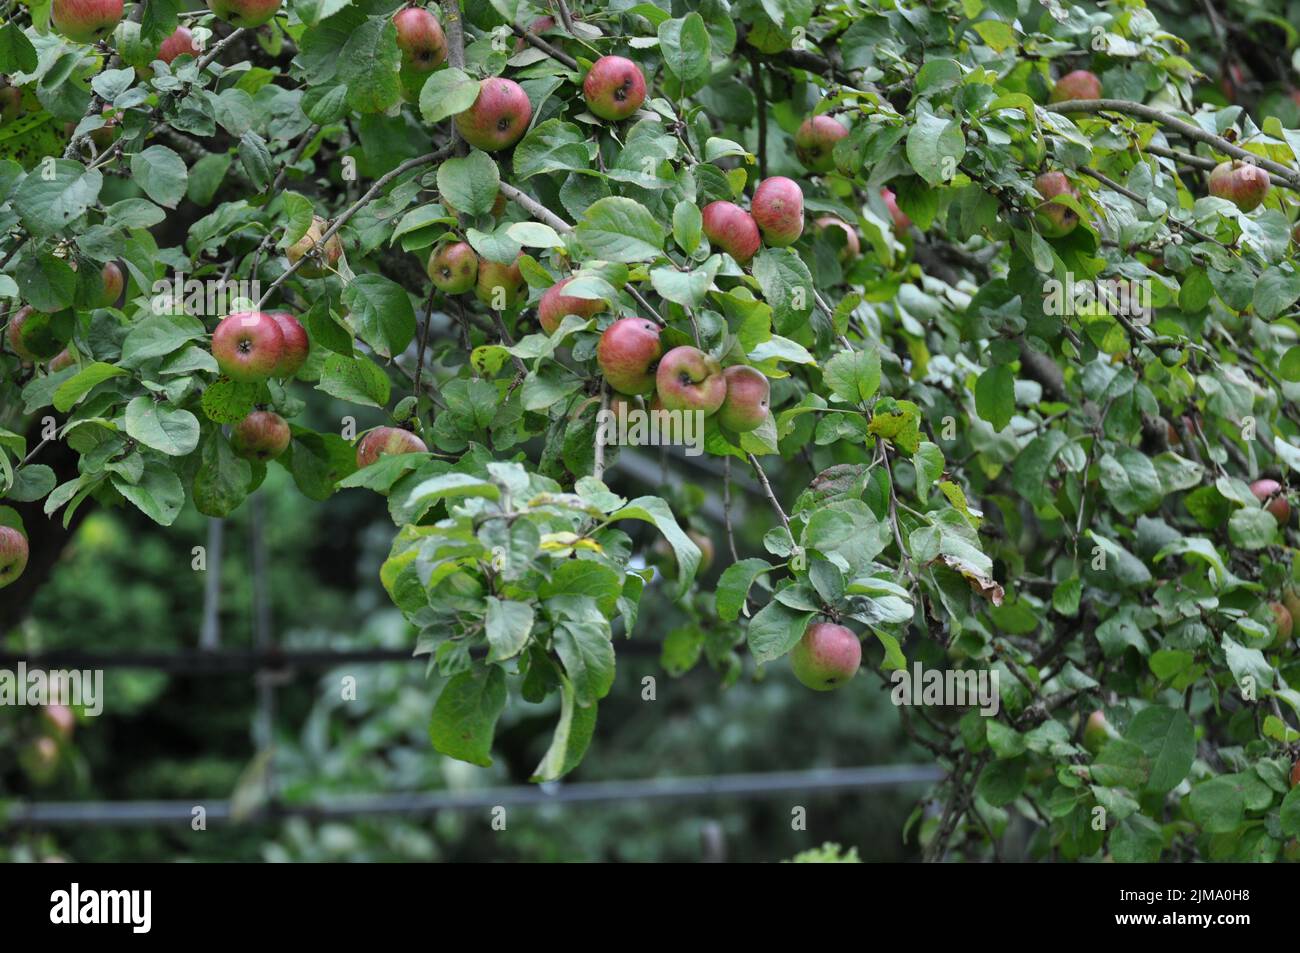 An old variety apple tree in a German country garden Stock Photo